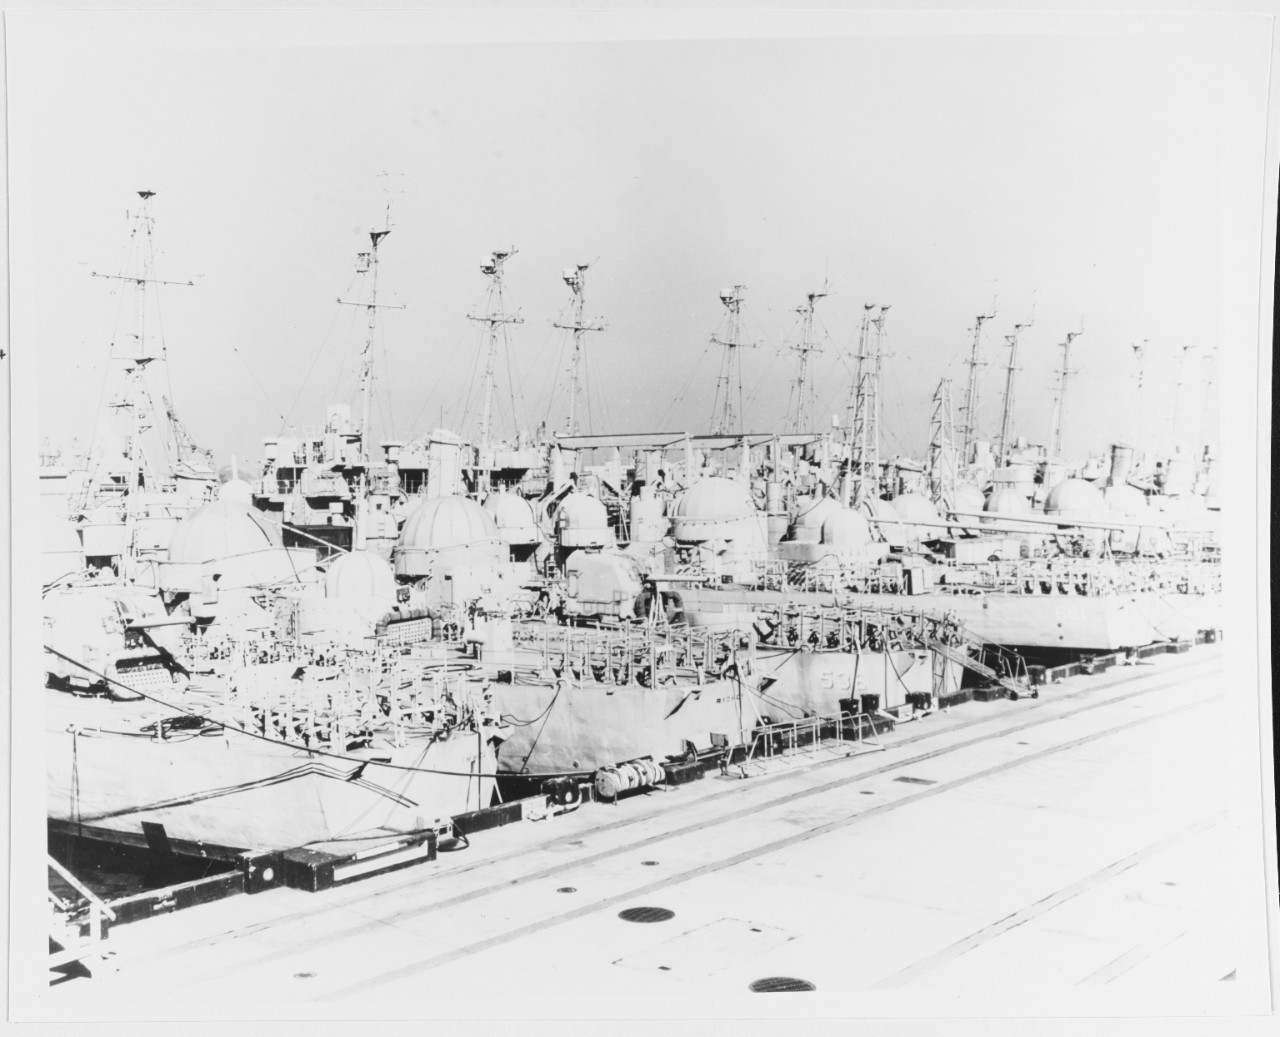 Reserve fleet ships berthed at San Diego, California.